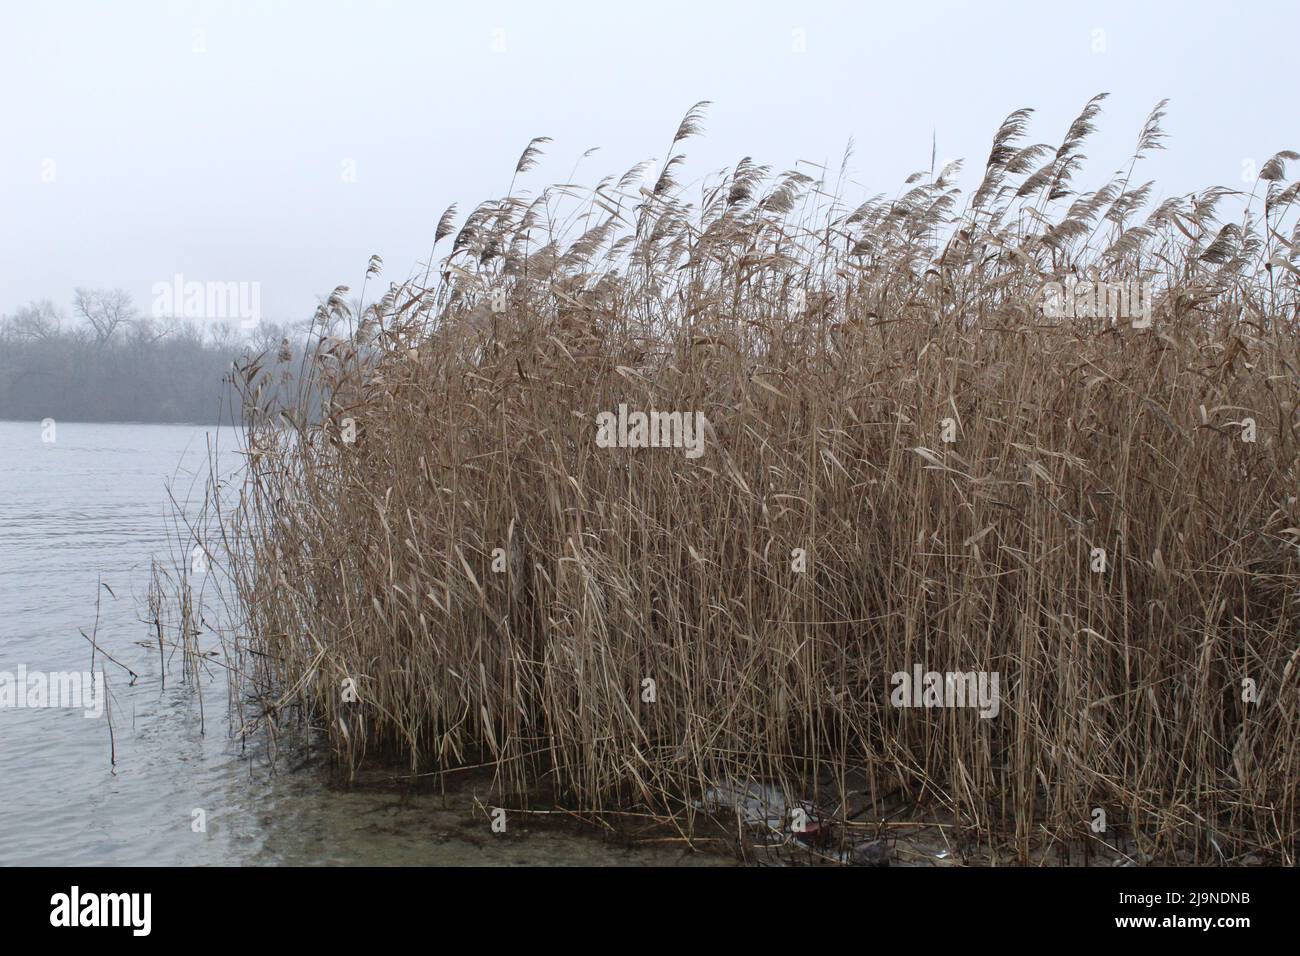 Thickets of reeds on the river bank Stock Photo